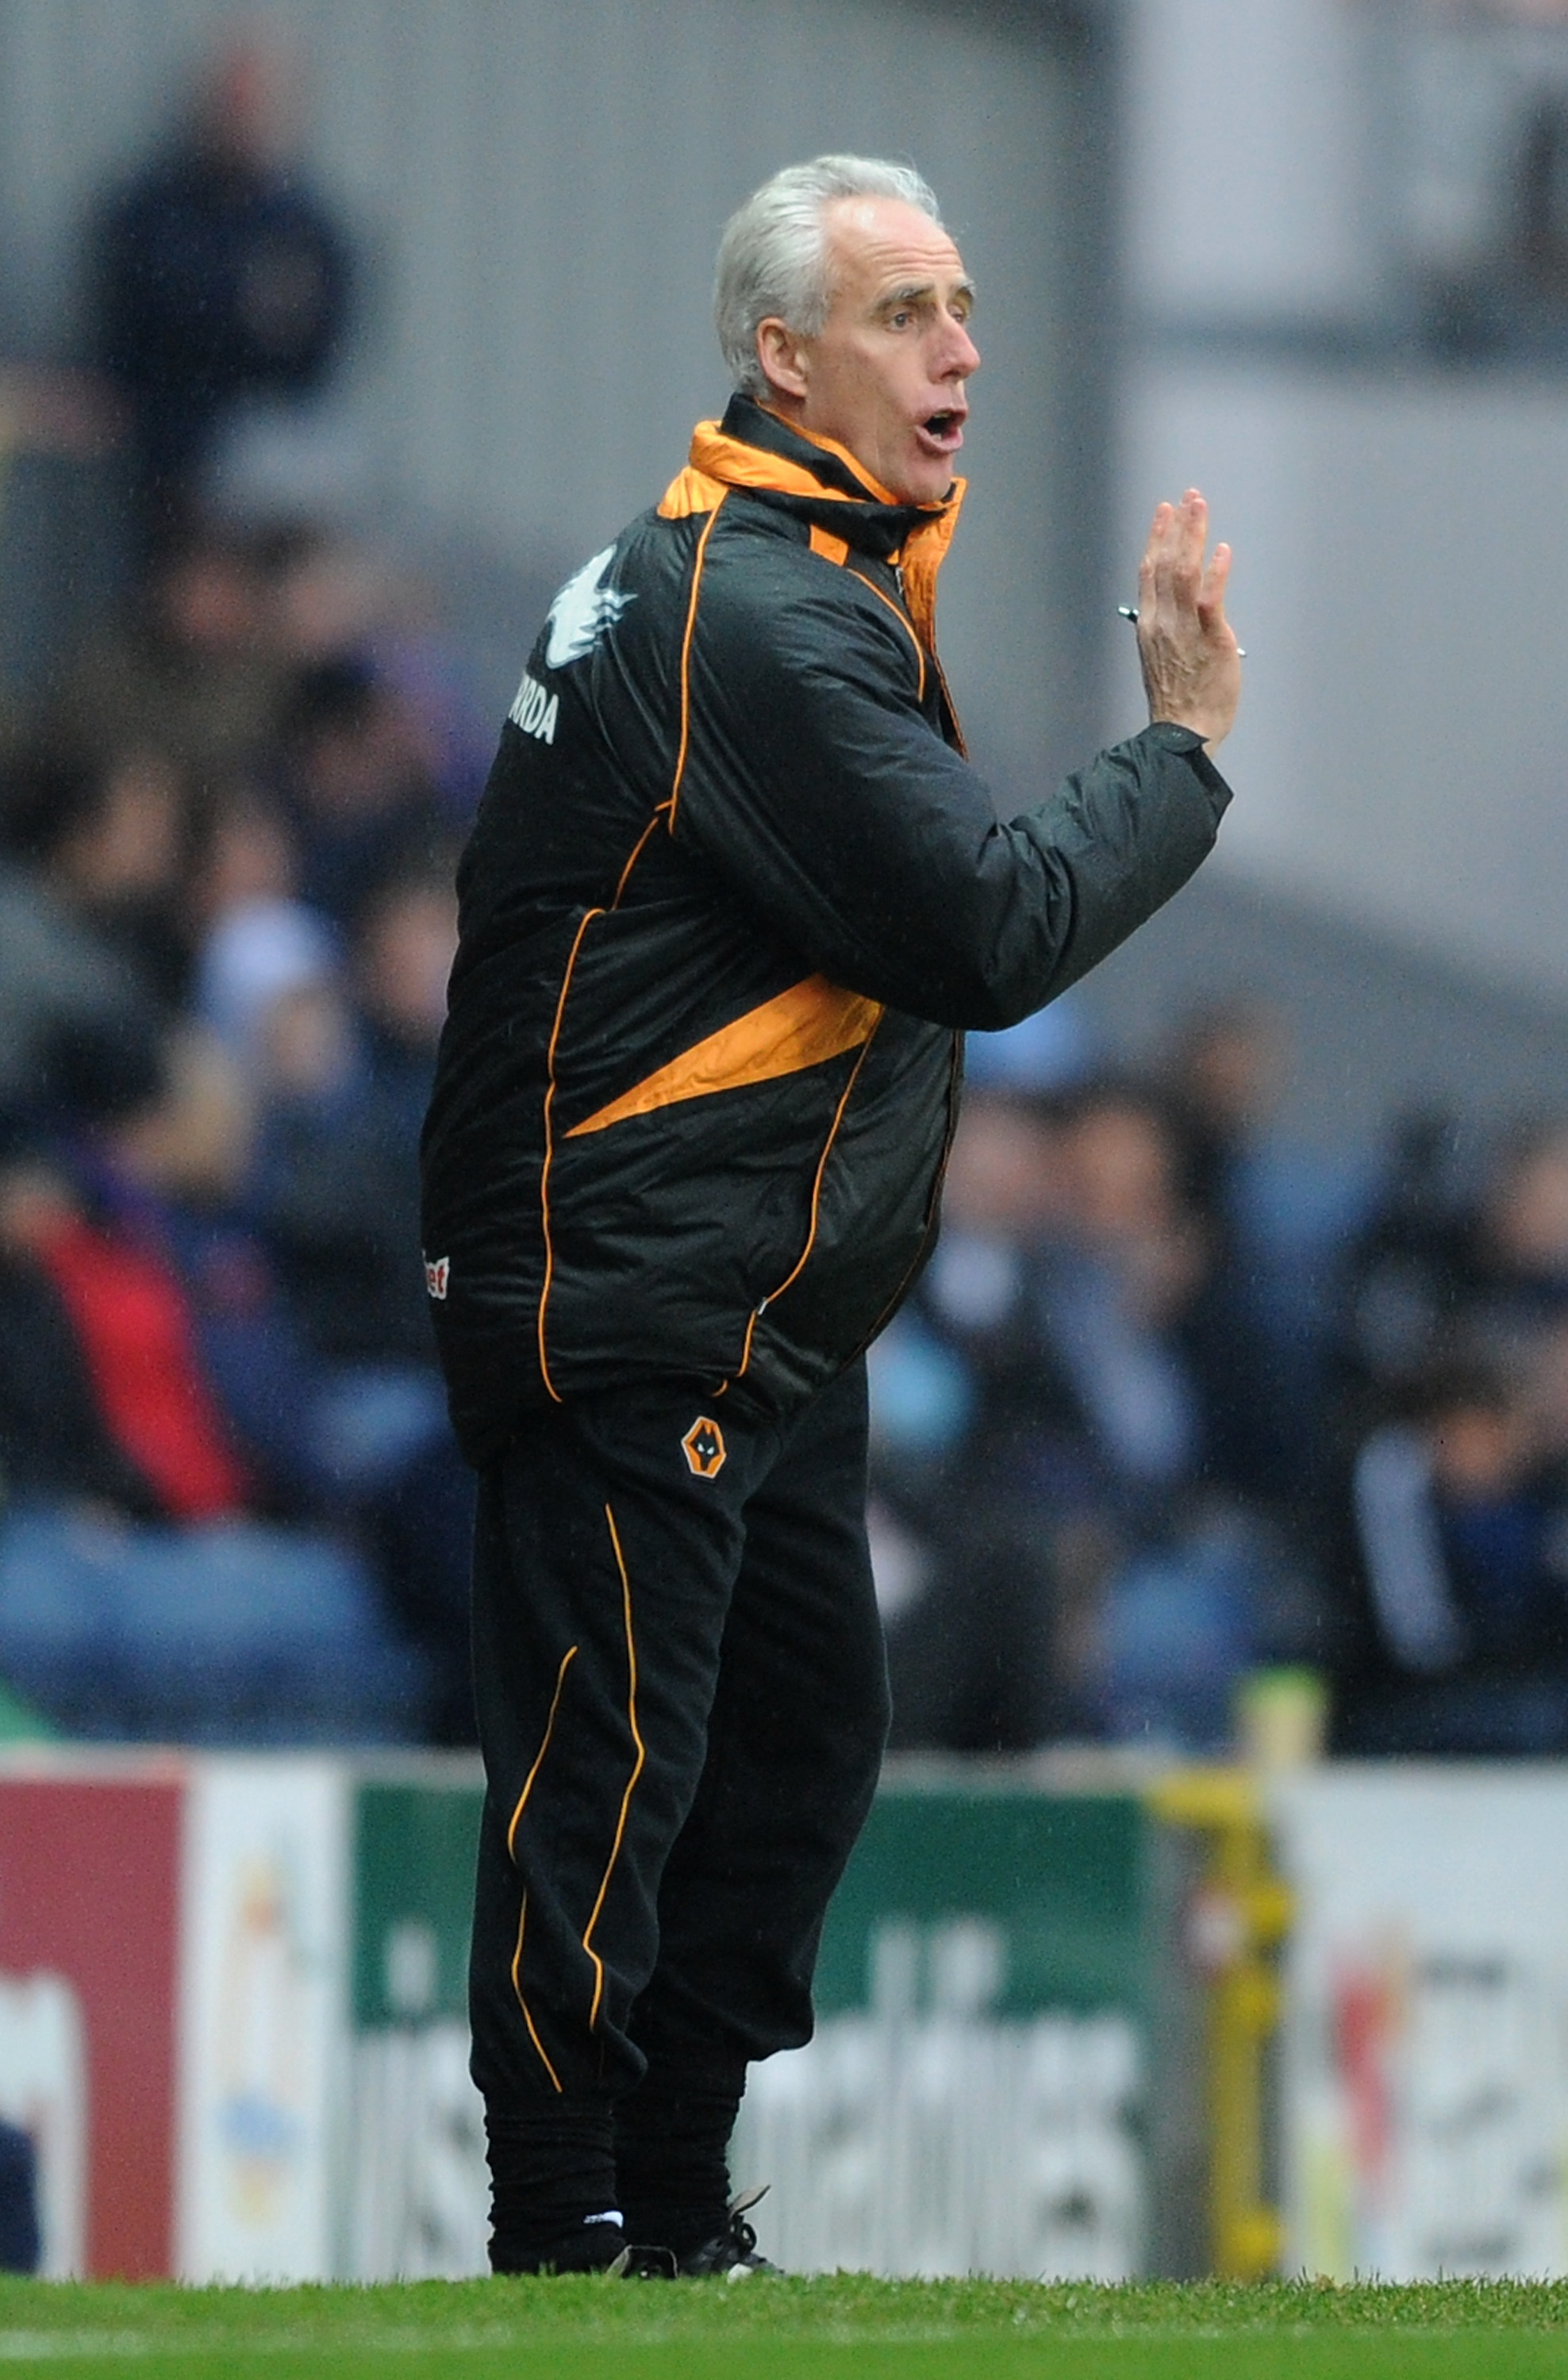 BLACKBURN, ENGLAND - DECEMBER 04:  Wolverhampton Wanderers manager Mick McCarthy gestures from the touchline during the Barclays Premier League match between Blackburn Rovers and Wolverhampton Wanderers at Ewood Park on December 4, 2010 in Blackburn, Engl